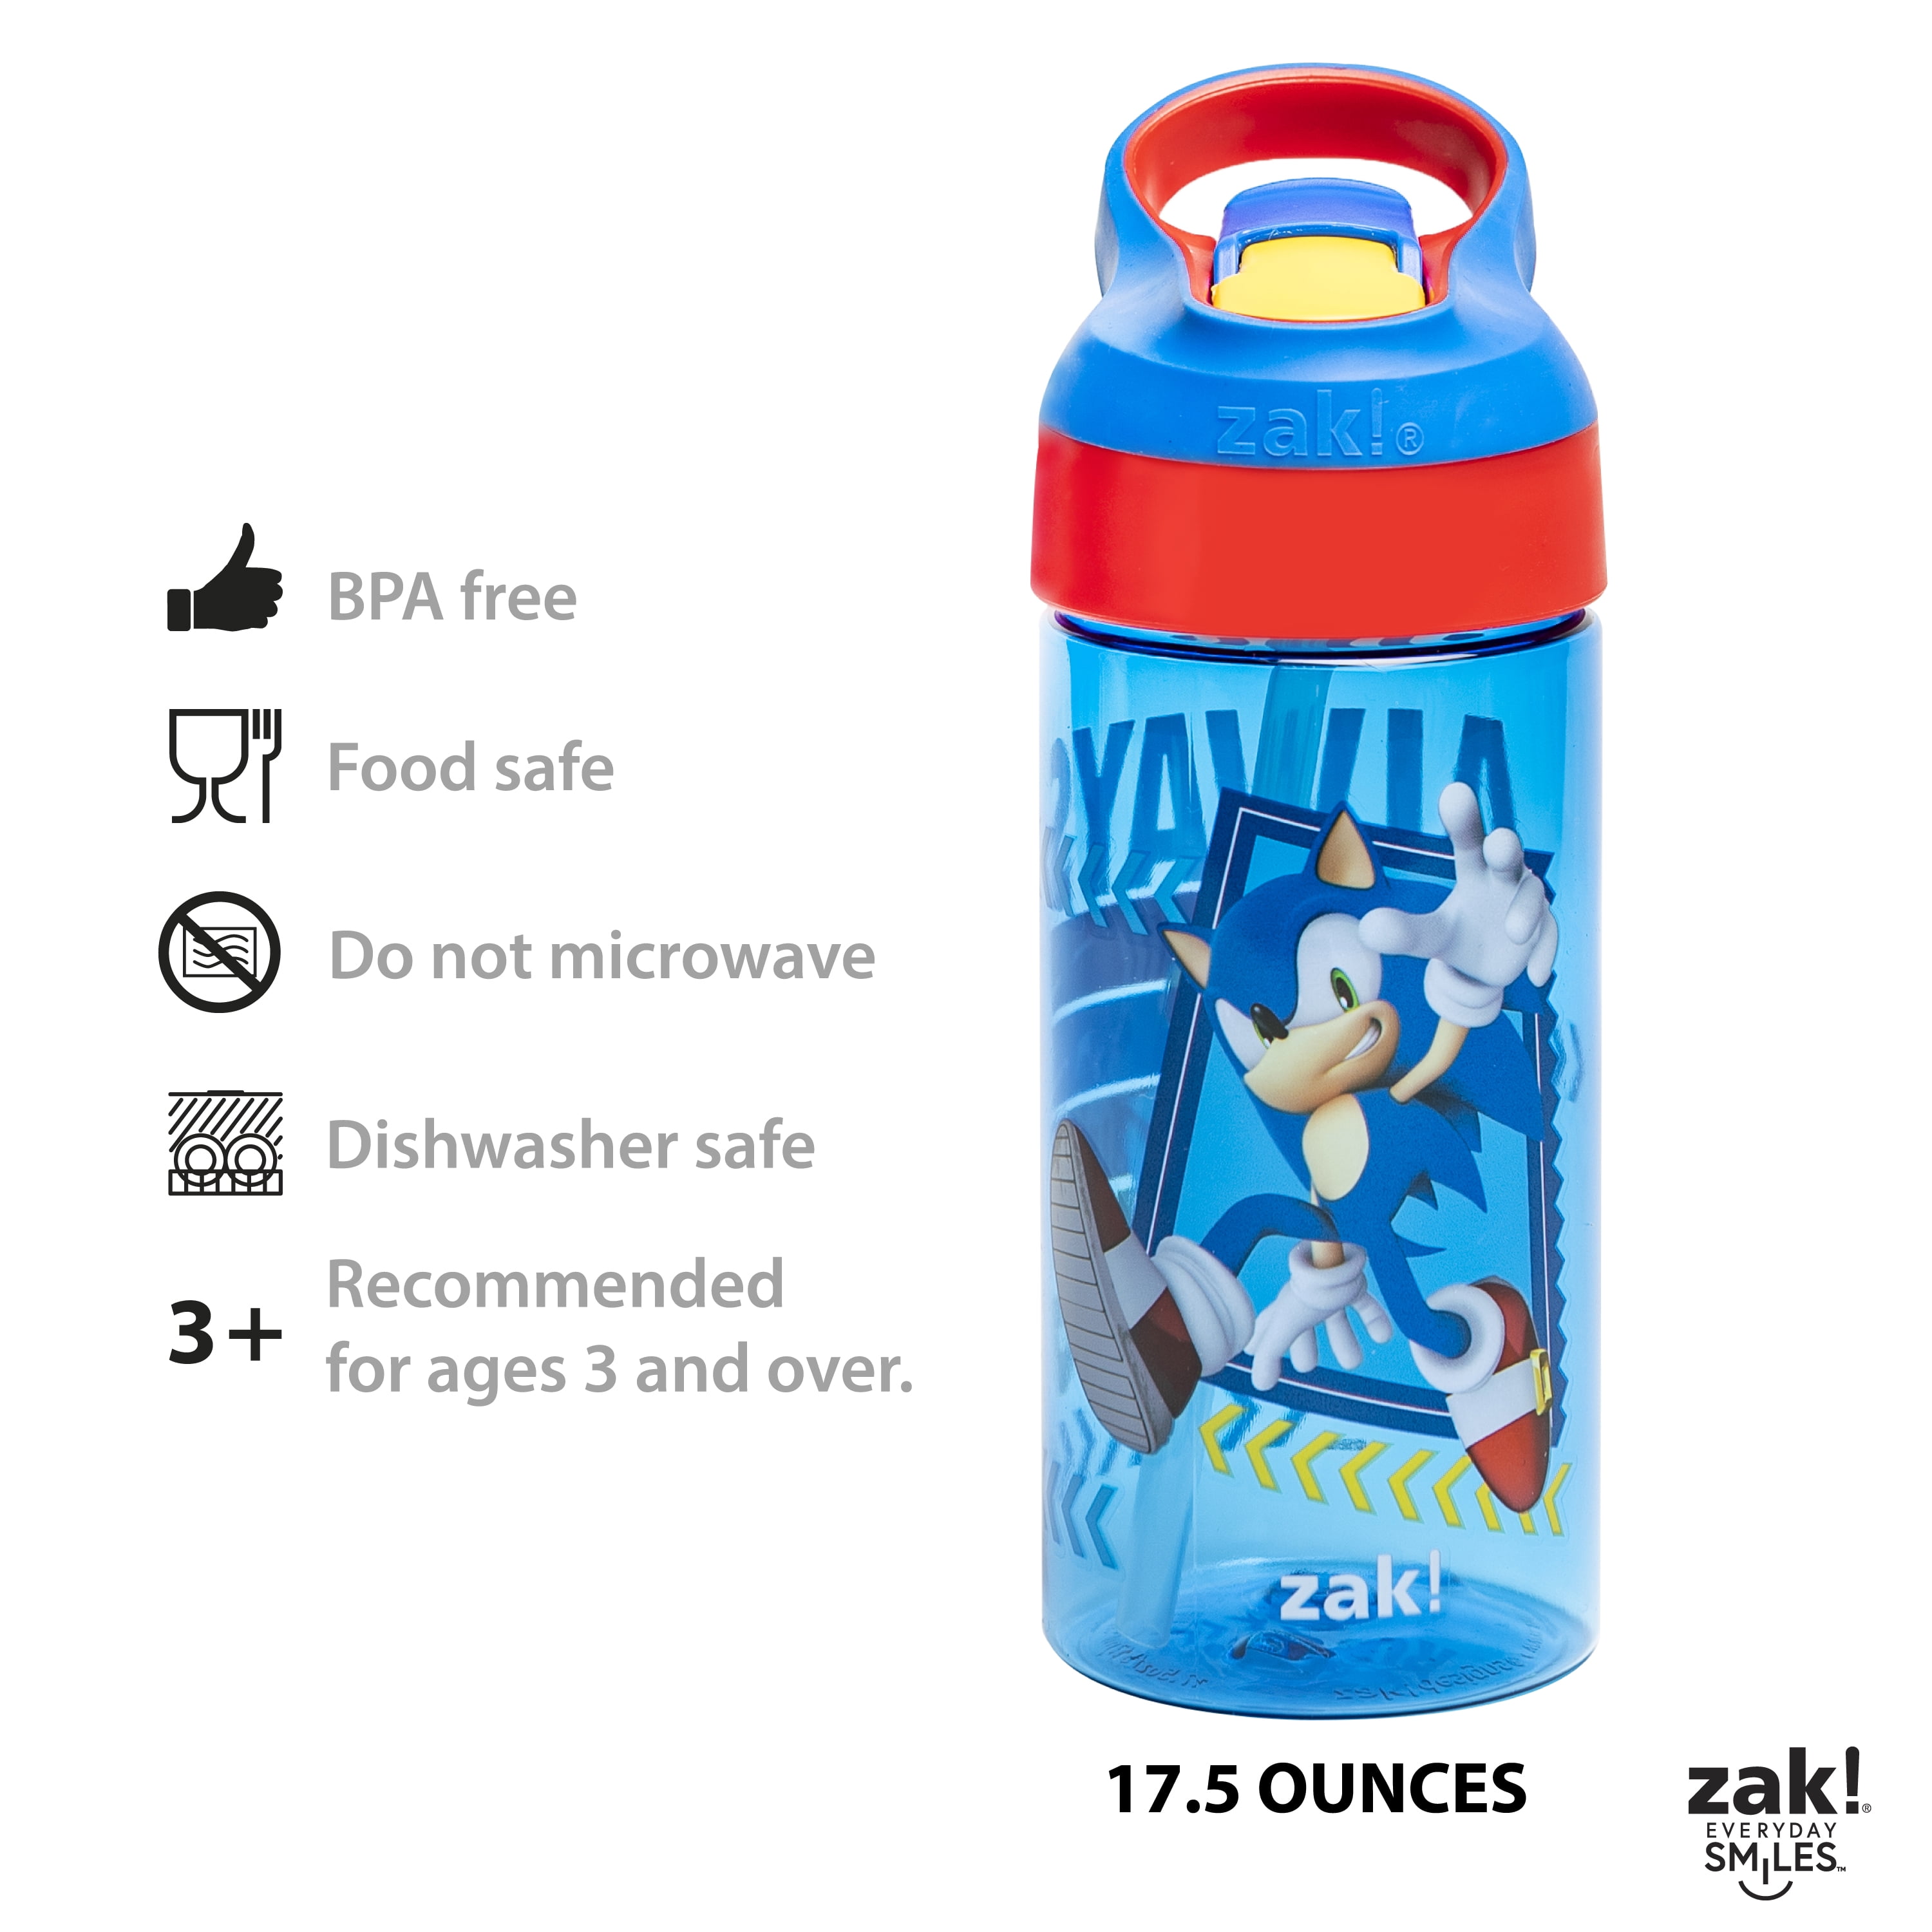 Sonic the Hedgehog 30th Anniversary Water Bottle by